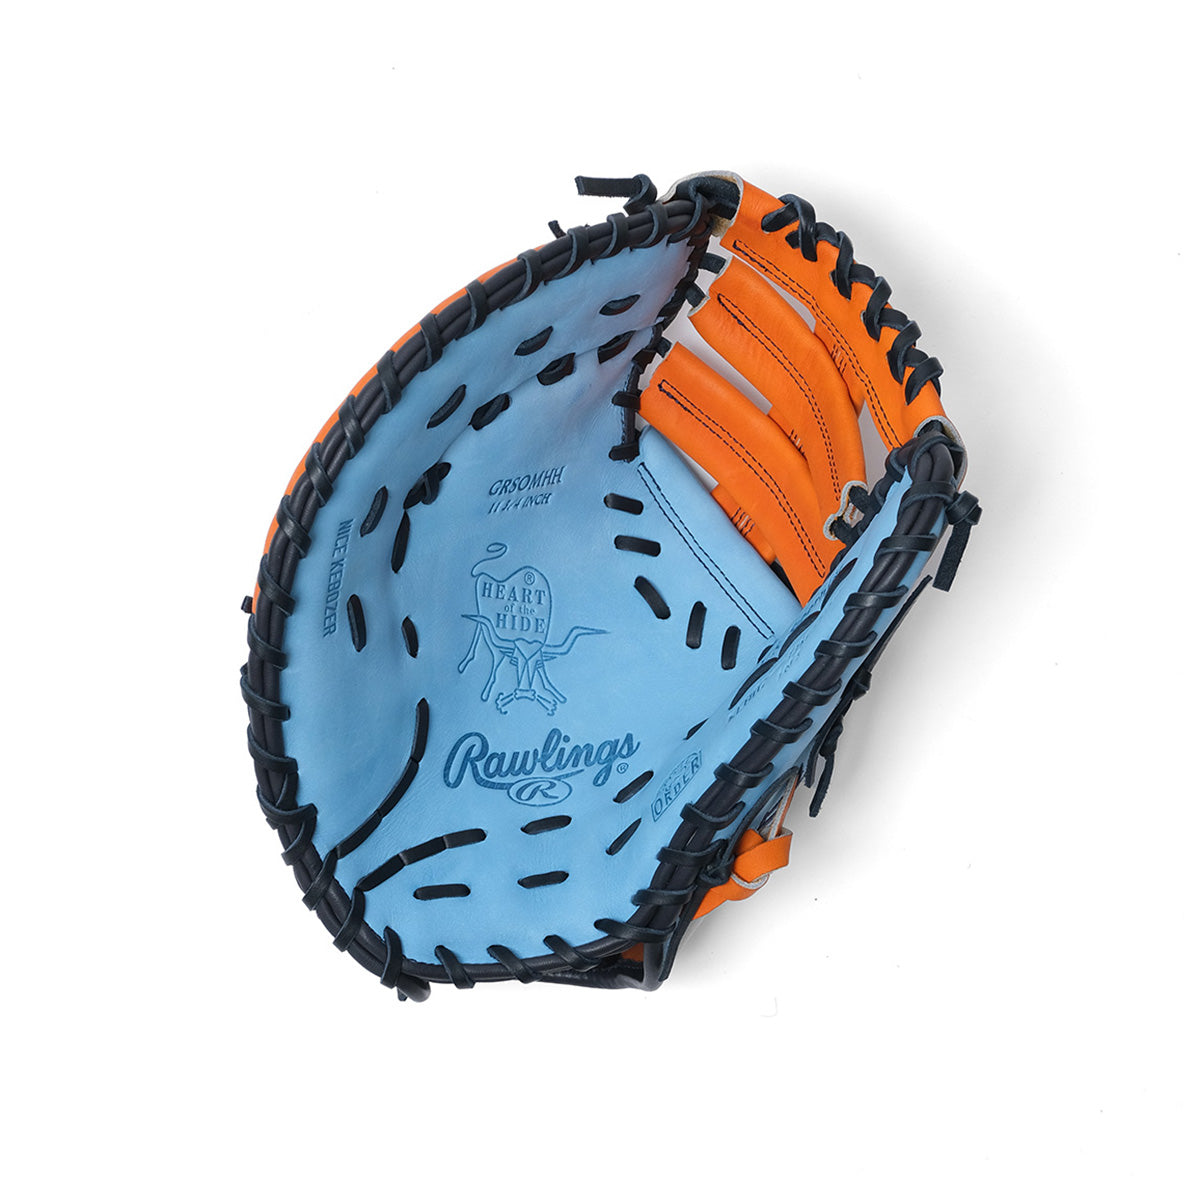 RAWLINGS FIRST BASE MITT CUSTOMIZED BY KEBOZ